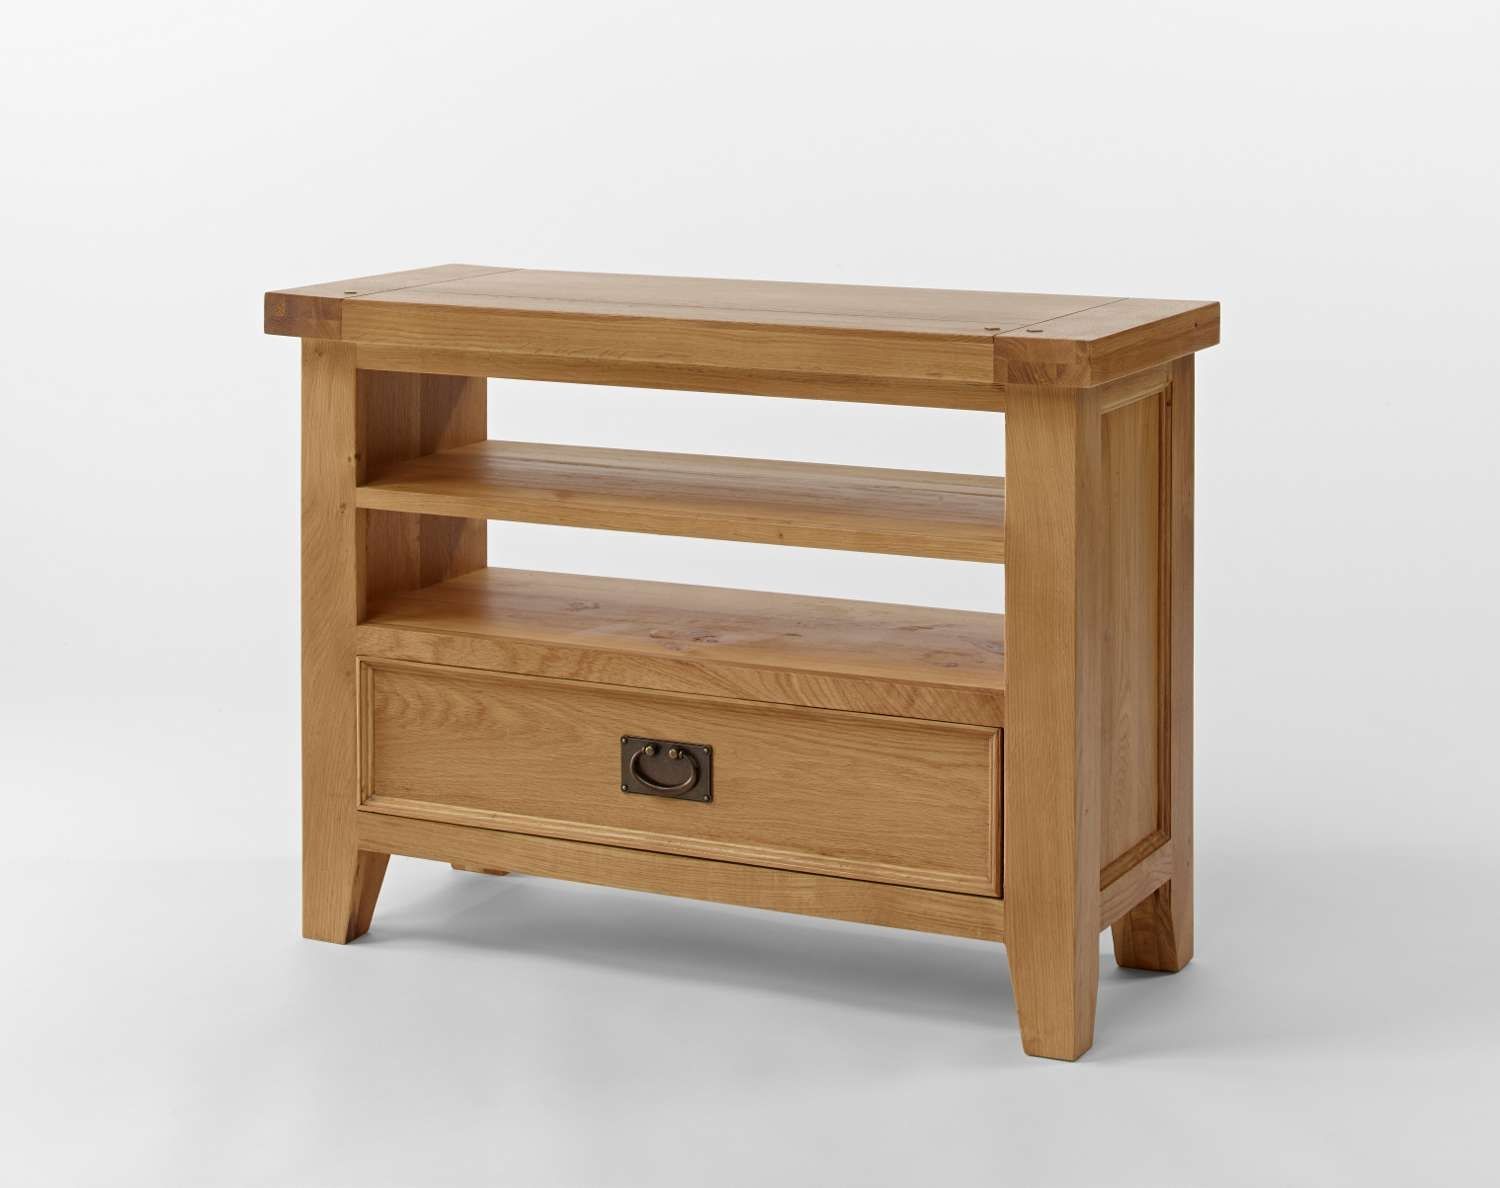 Chiltern Oak Small Tv Unit | Oak Furniture Solutions With Regard To Small Tv Cabinets (View 17 of 20)